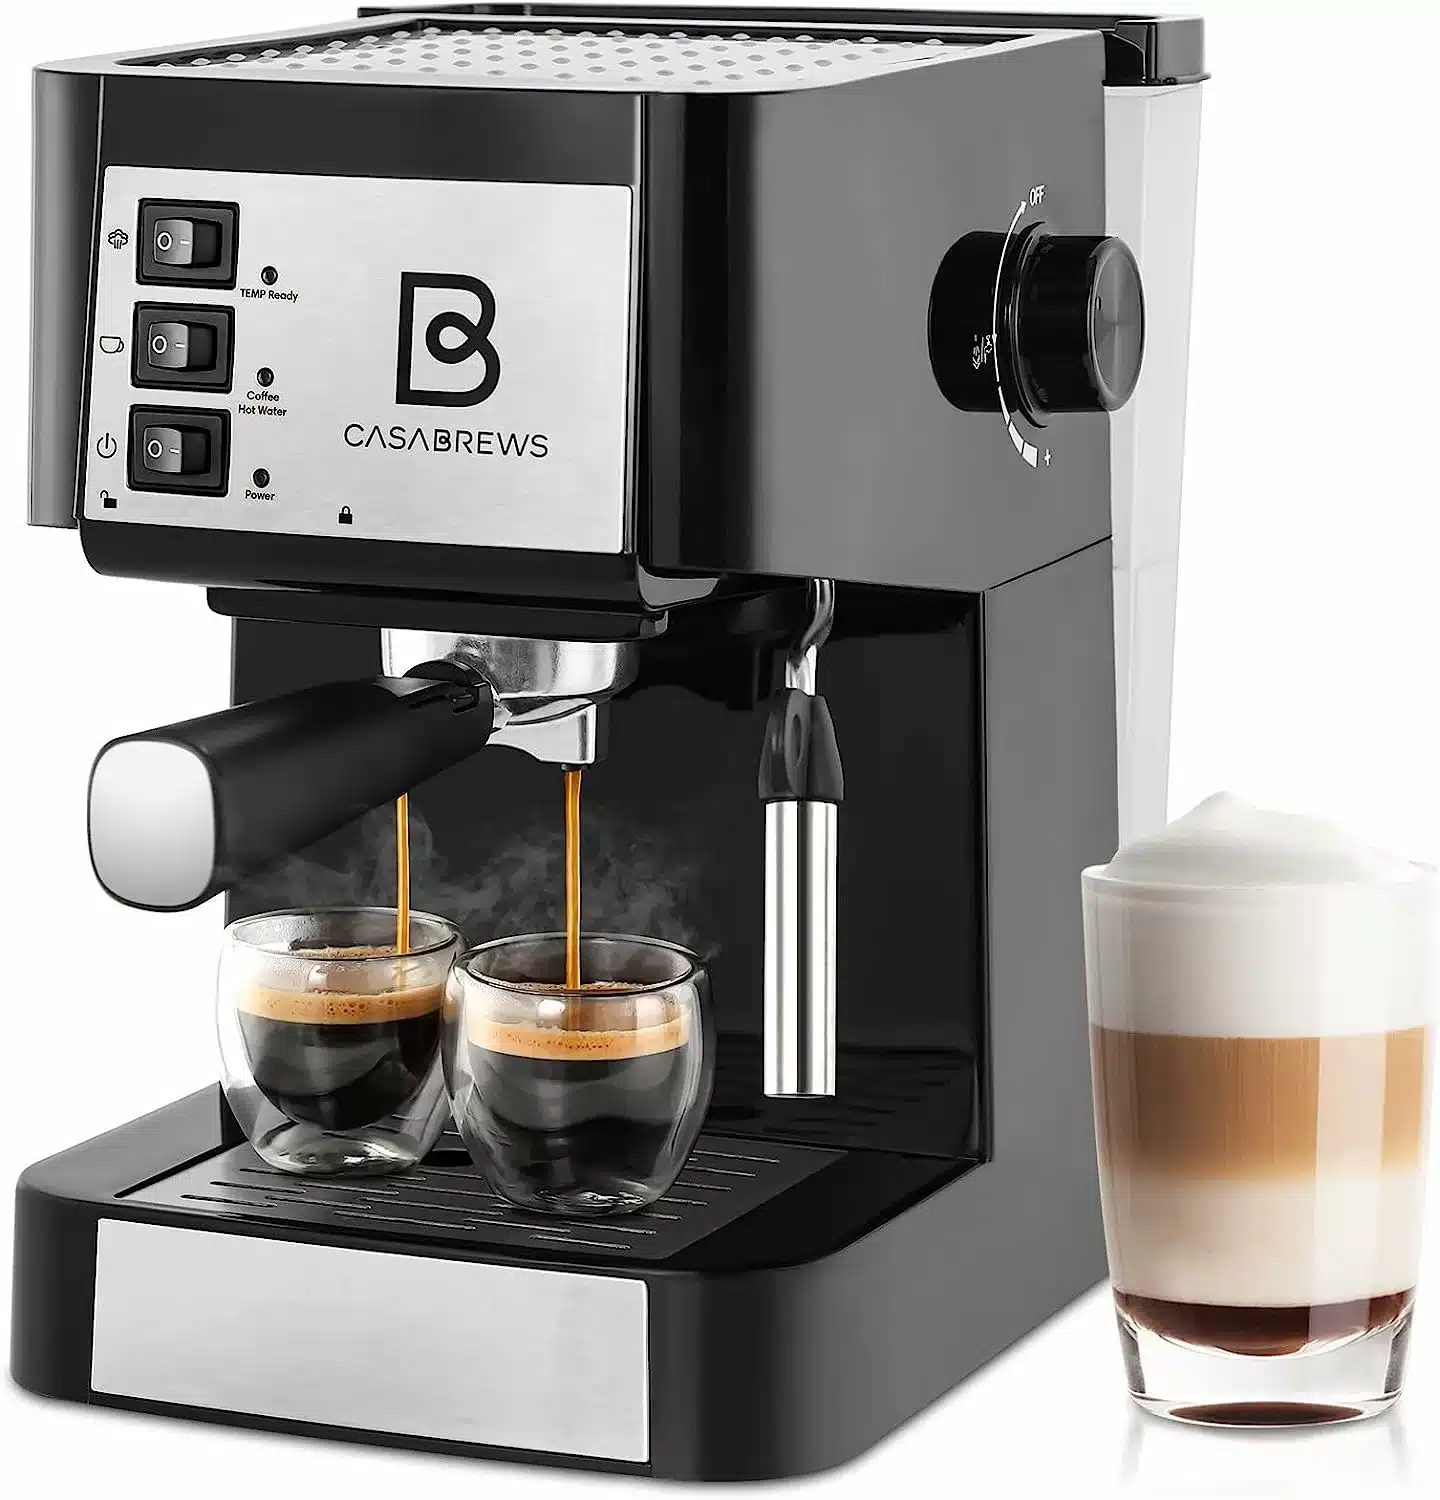 Balck and silver Casabrews Espresso Machine with 2 glasses of black coffee being poured and a frothy coffee beside the machine.